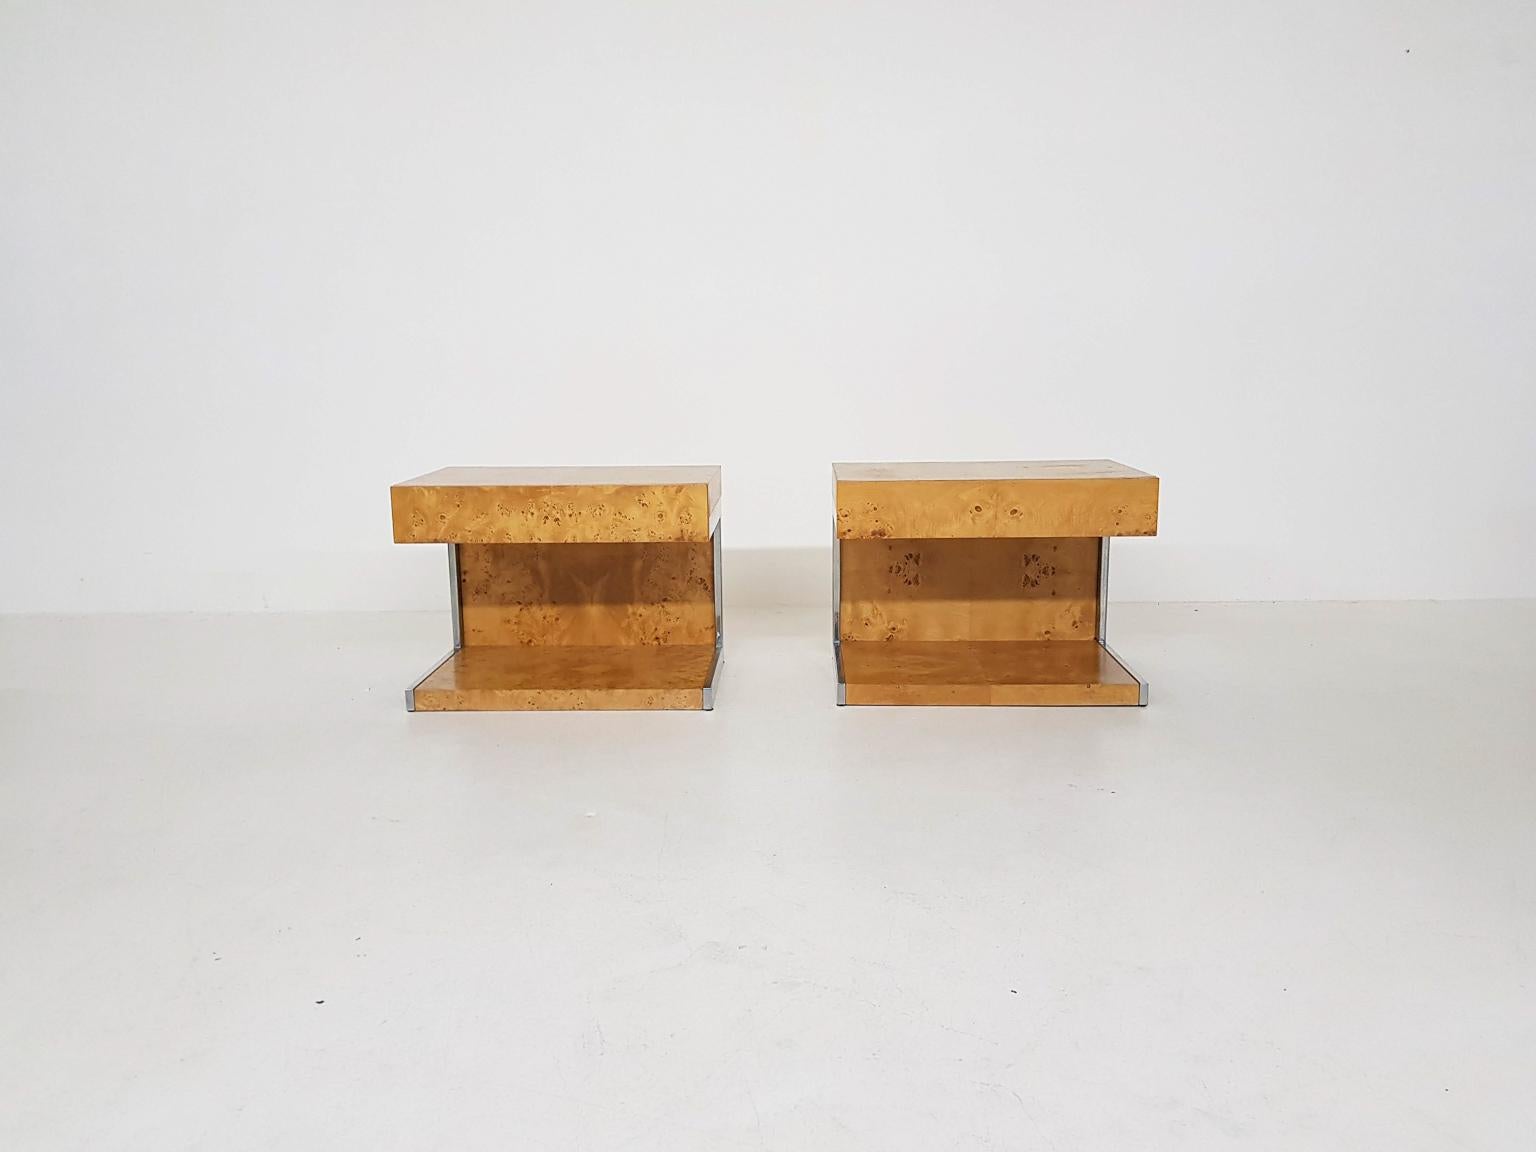 Pair of nice burl wood night stands with chromed details. We think it is a design by Milo Baughman for Thayer Coggin. These tables were received from the Hilton hotel where they were used in a luxury suite. The stands are stamped with the number